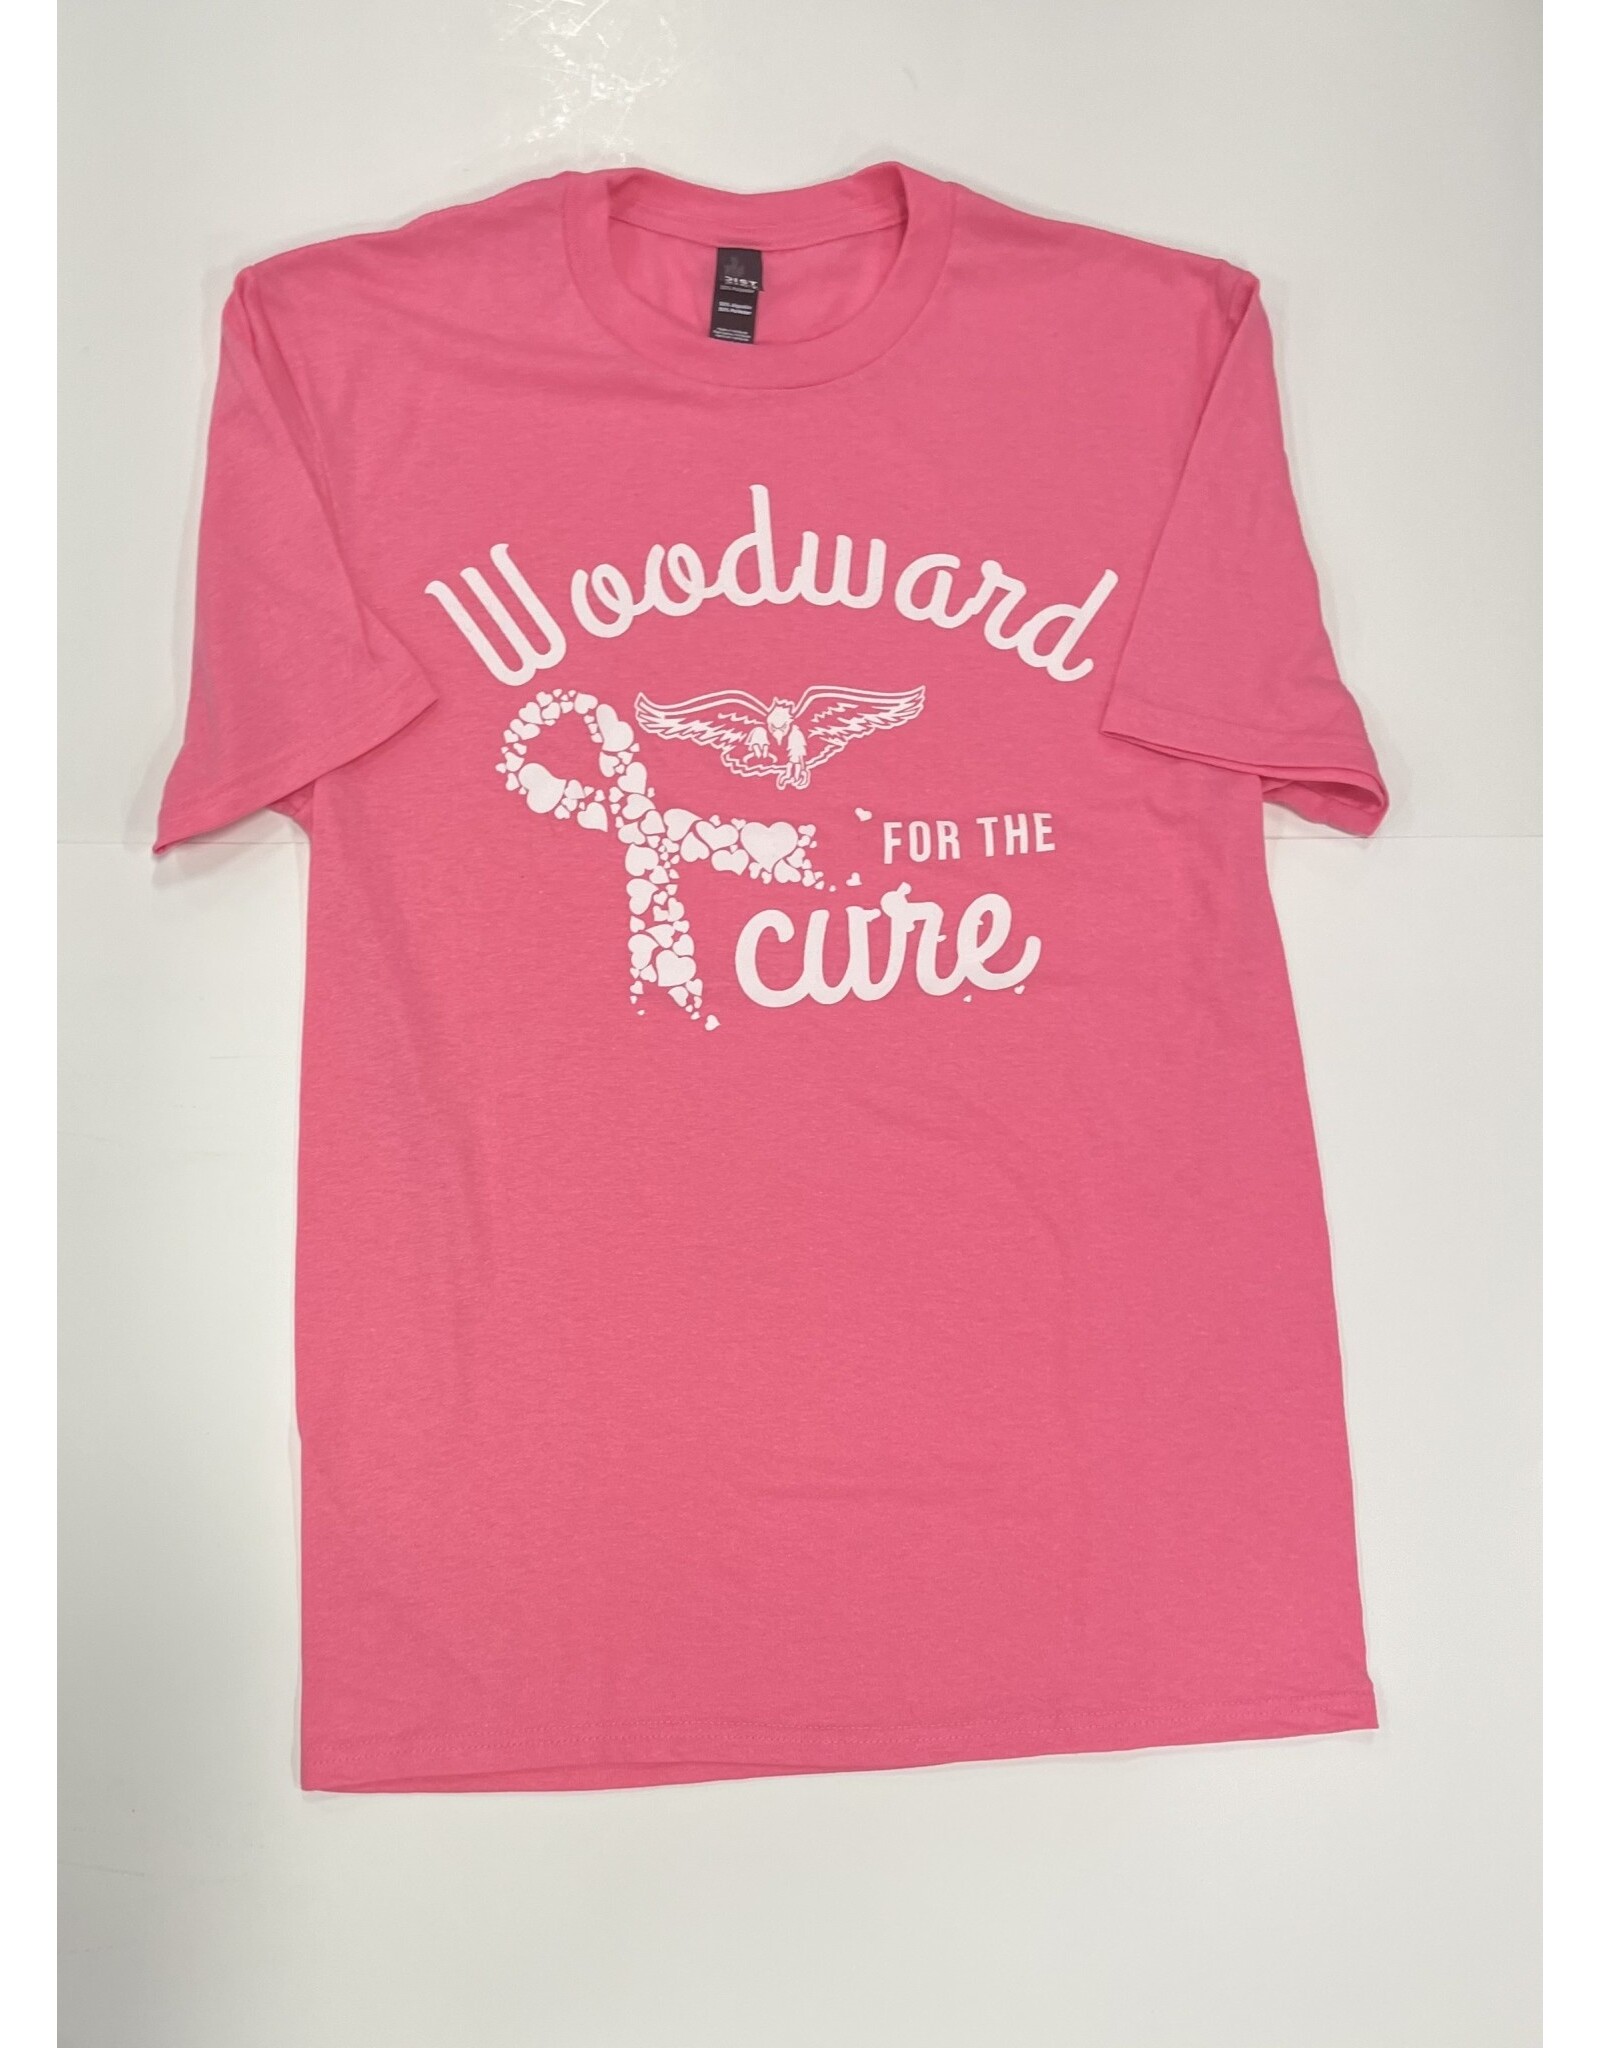 CI Sport SS Woodward For the Cure